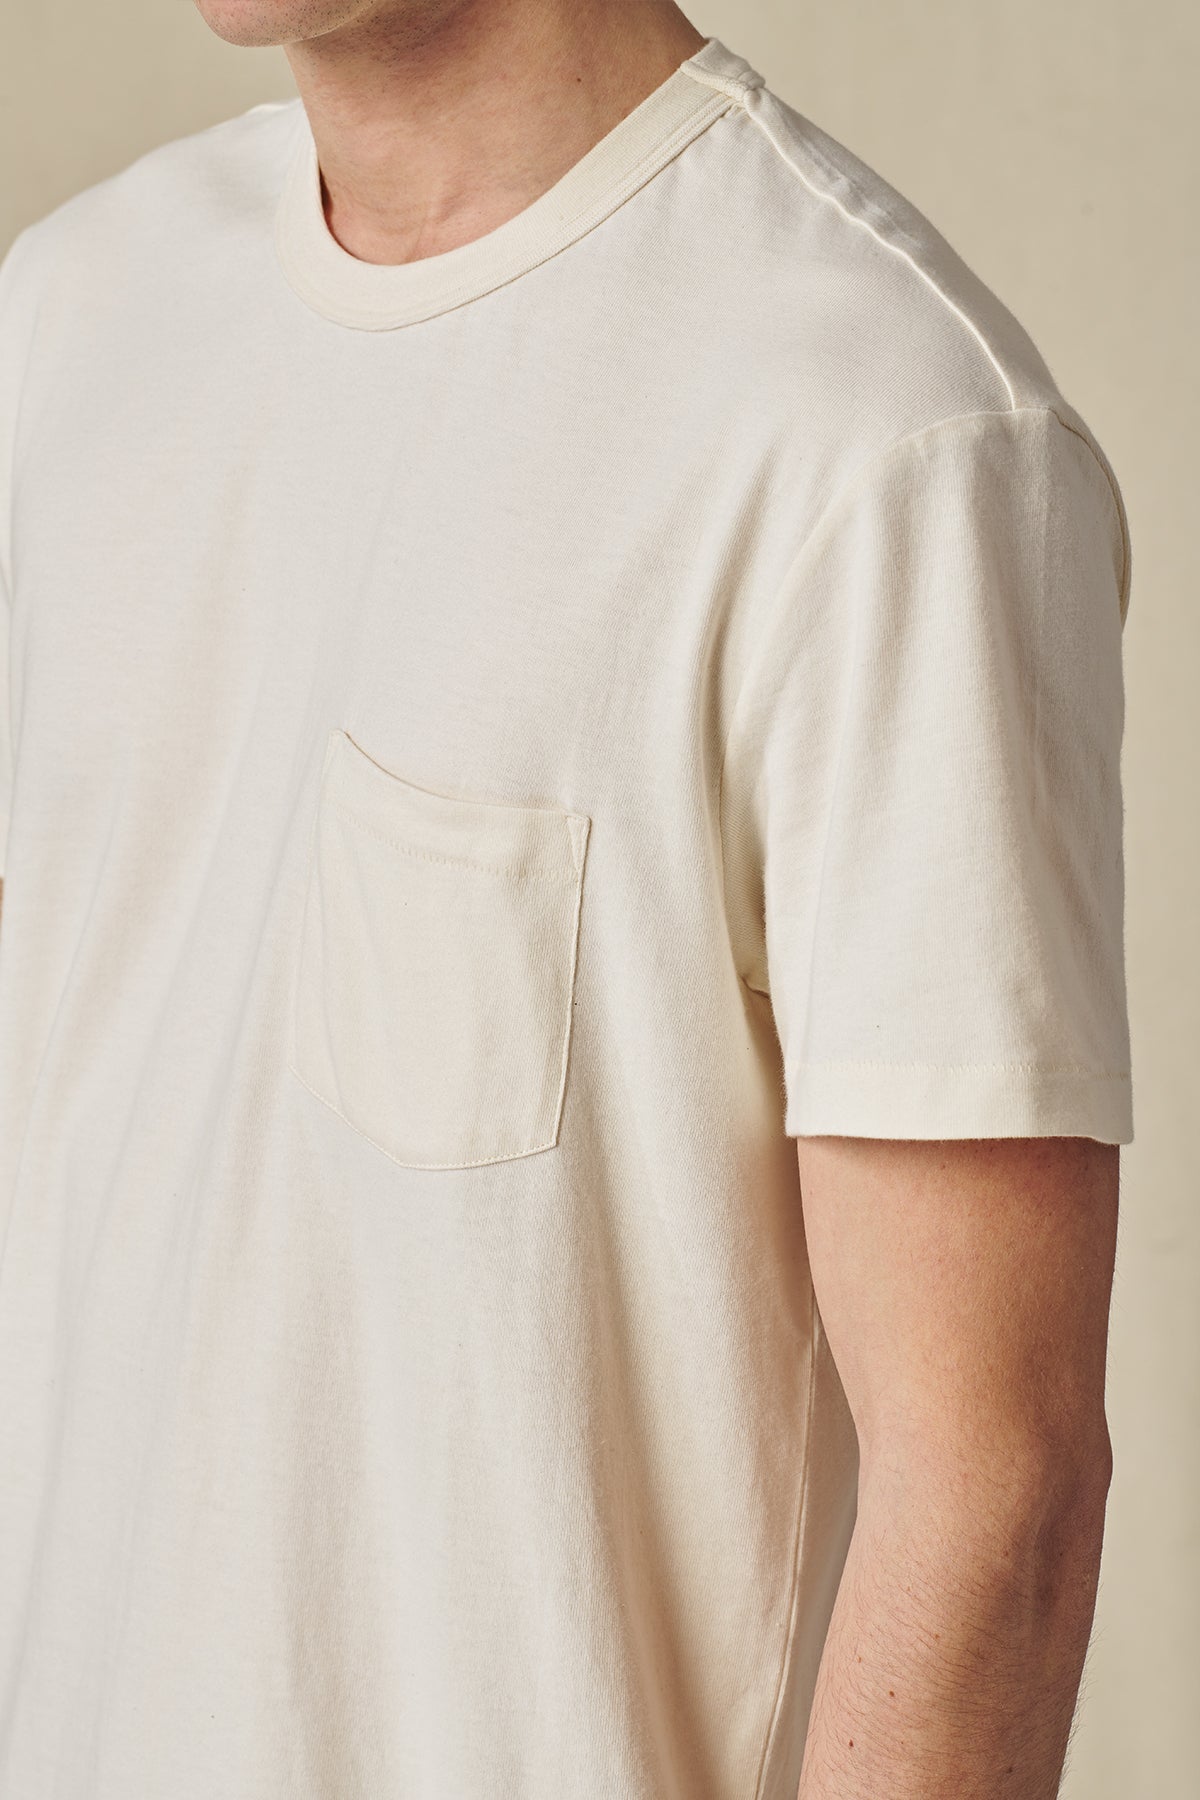 up close side view of White Globe Tee